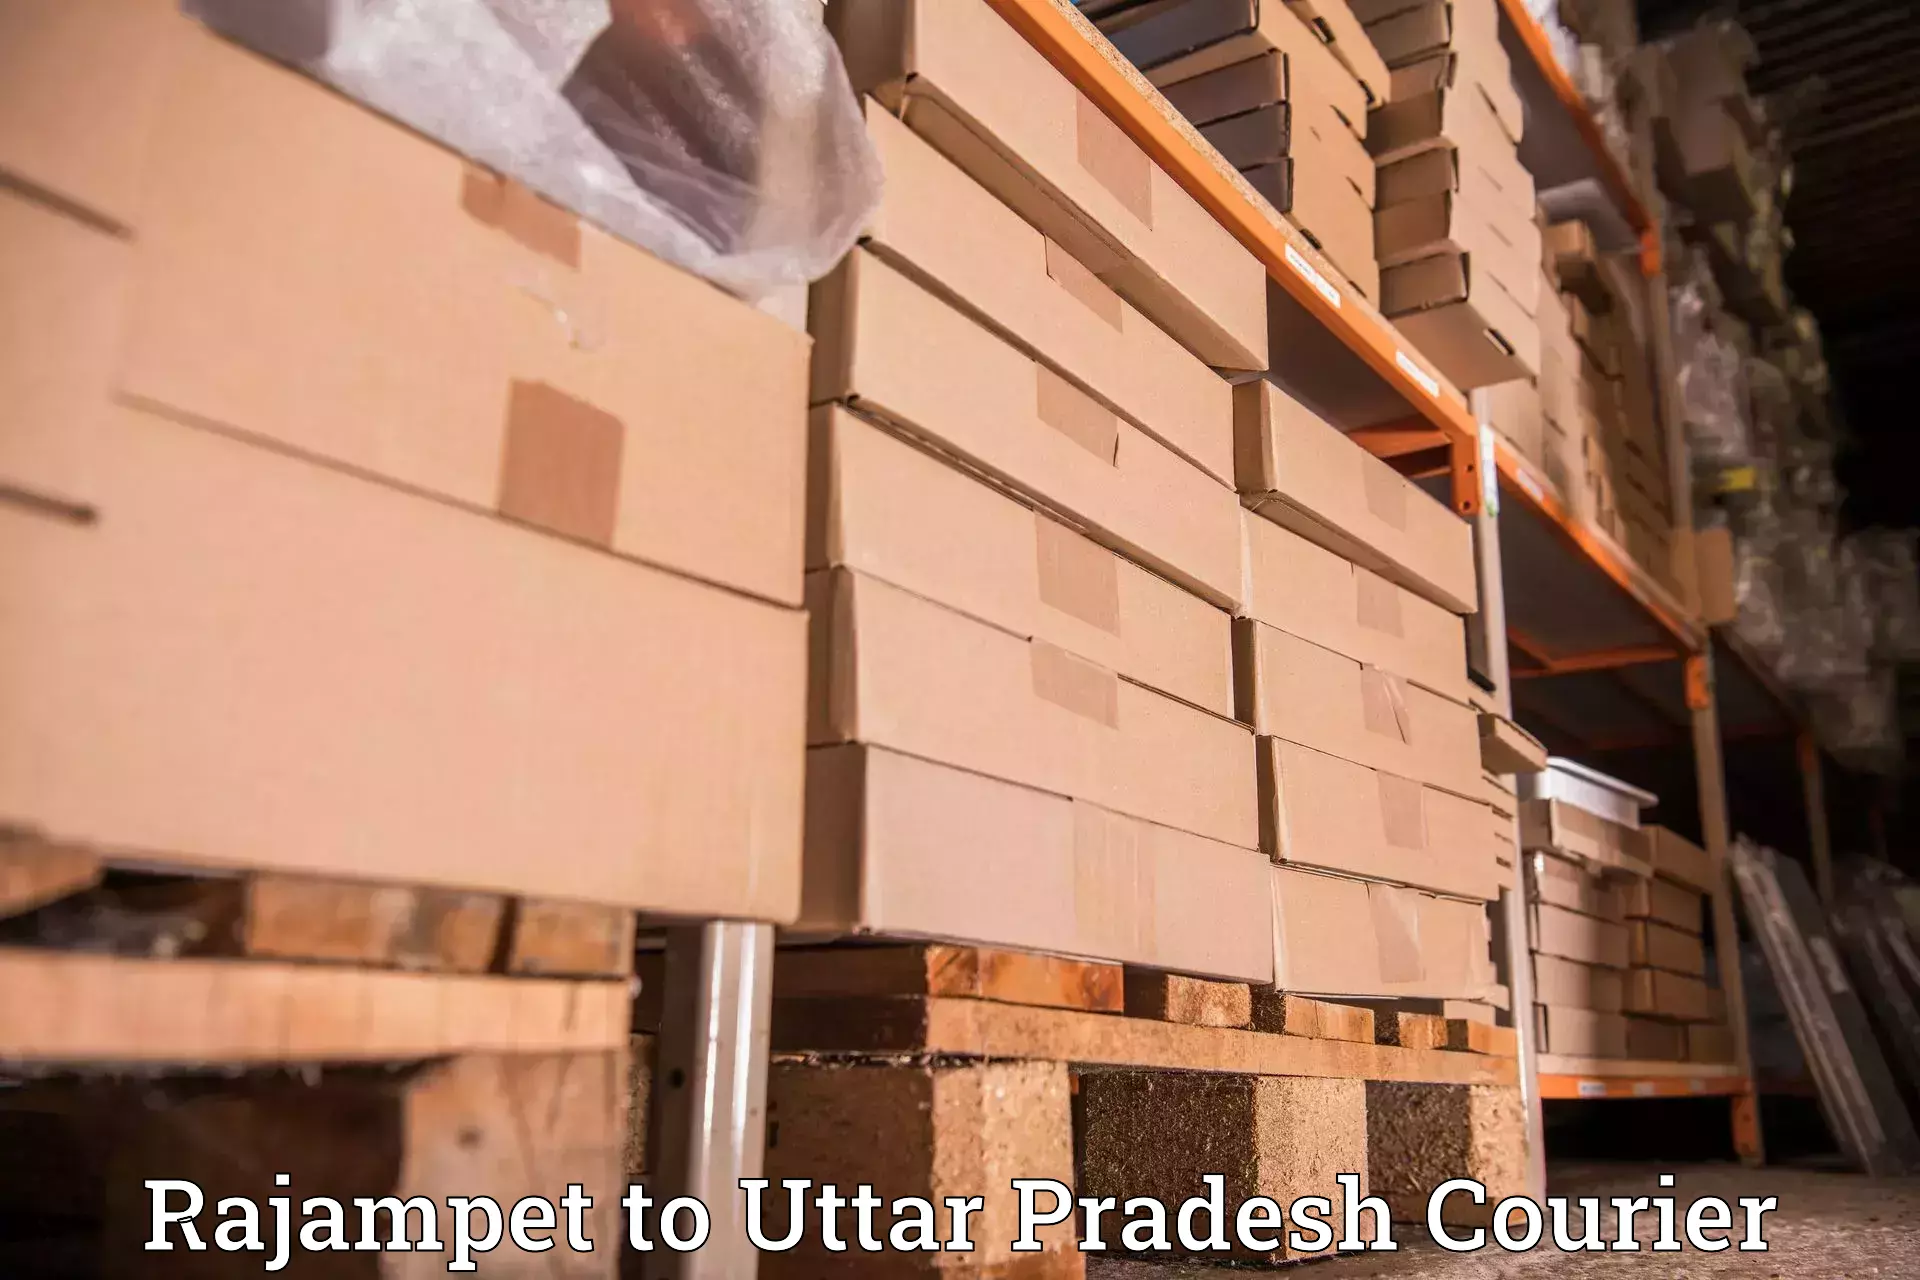 Easy access courier services Rajampet to Allahabad